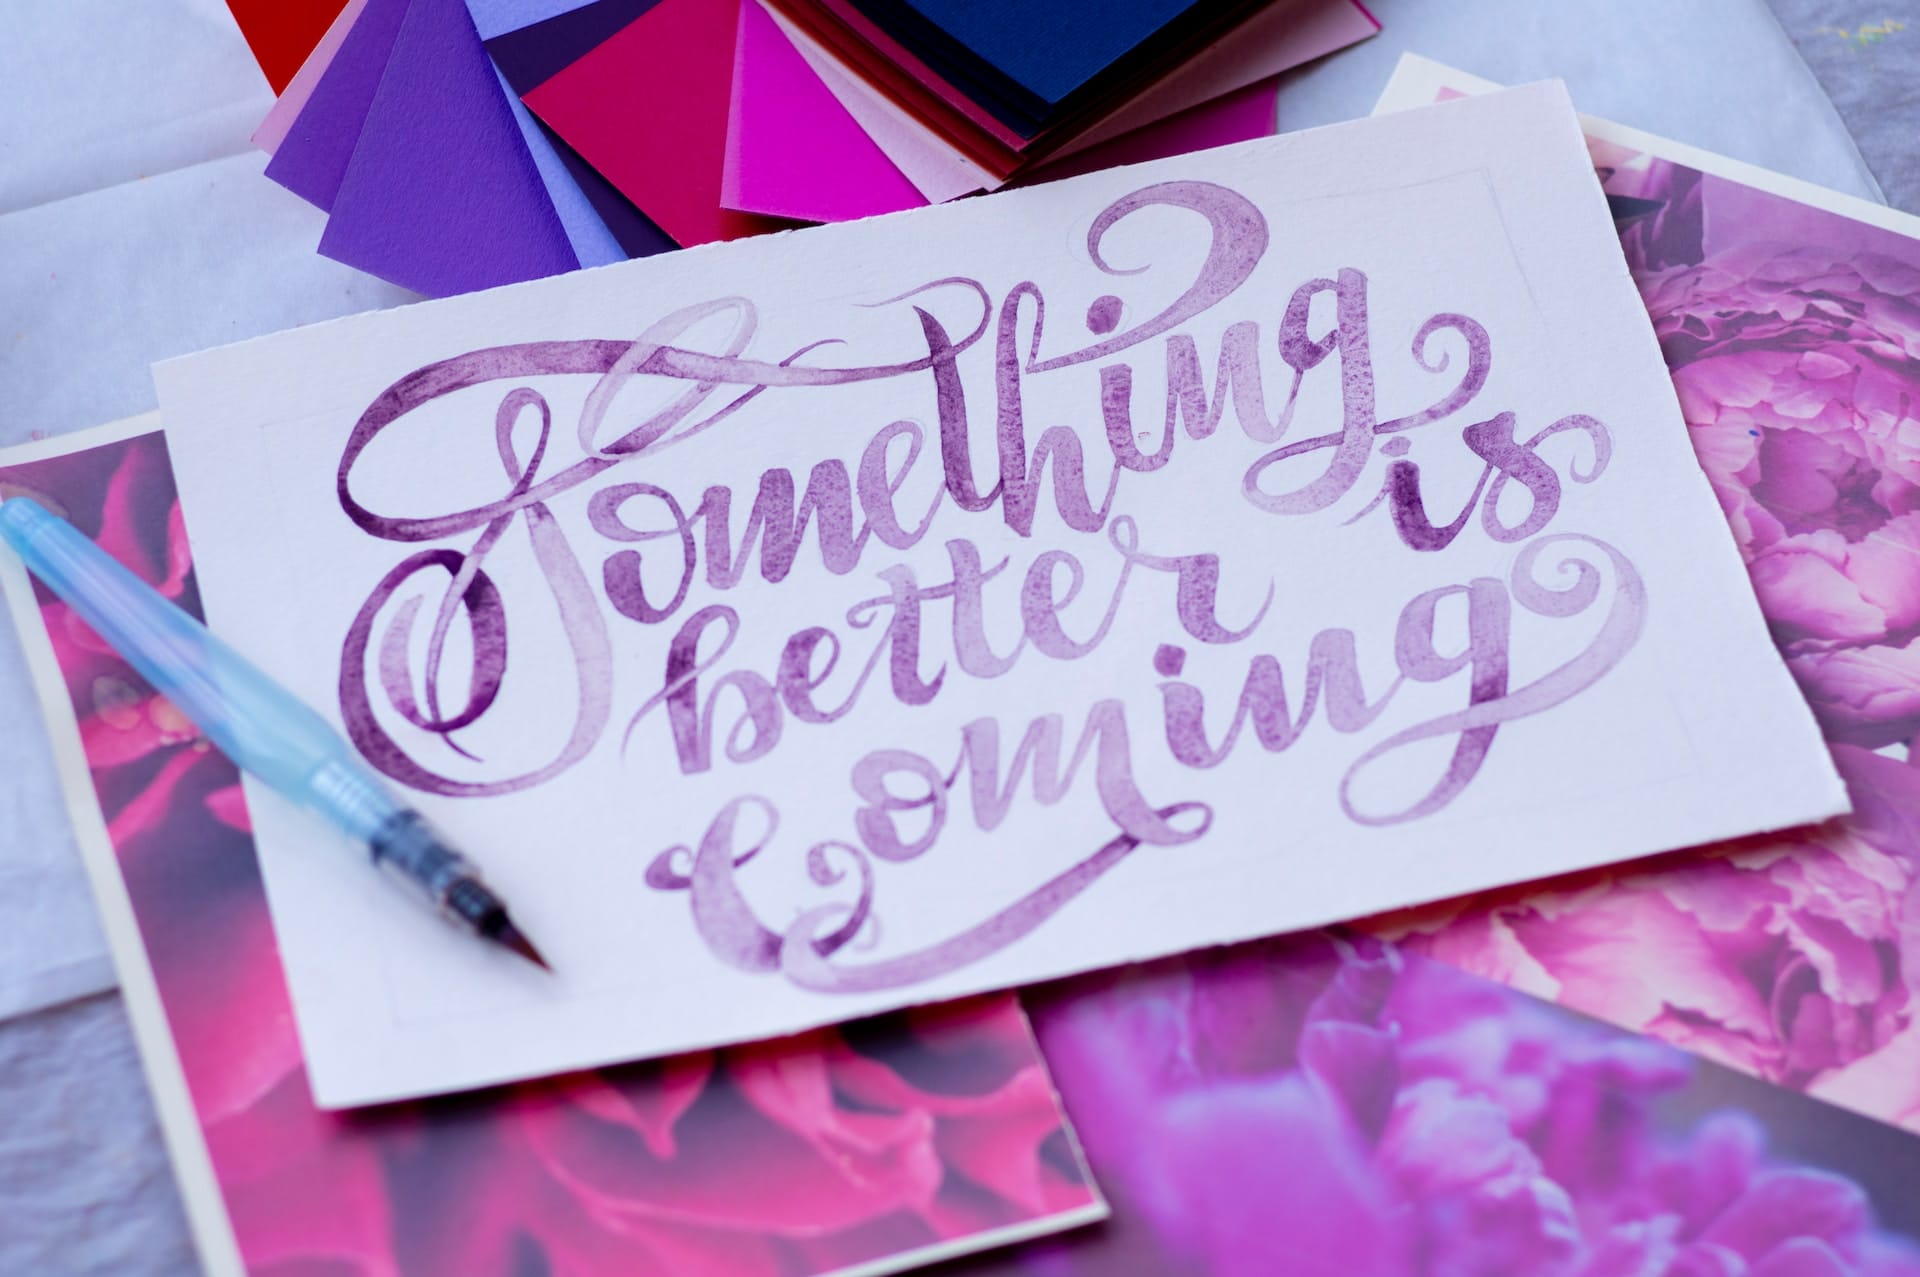 A watercolor calligraphy artwork featuring the positive affirmation 'Something better is coming'. The elegant, flowing script and the use of vibrant colors emphasize the uplifting and hopeful message, ideal for inspiring optimism and a positive outlook.